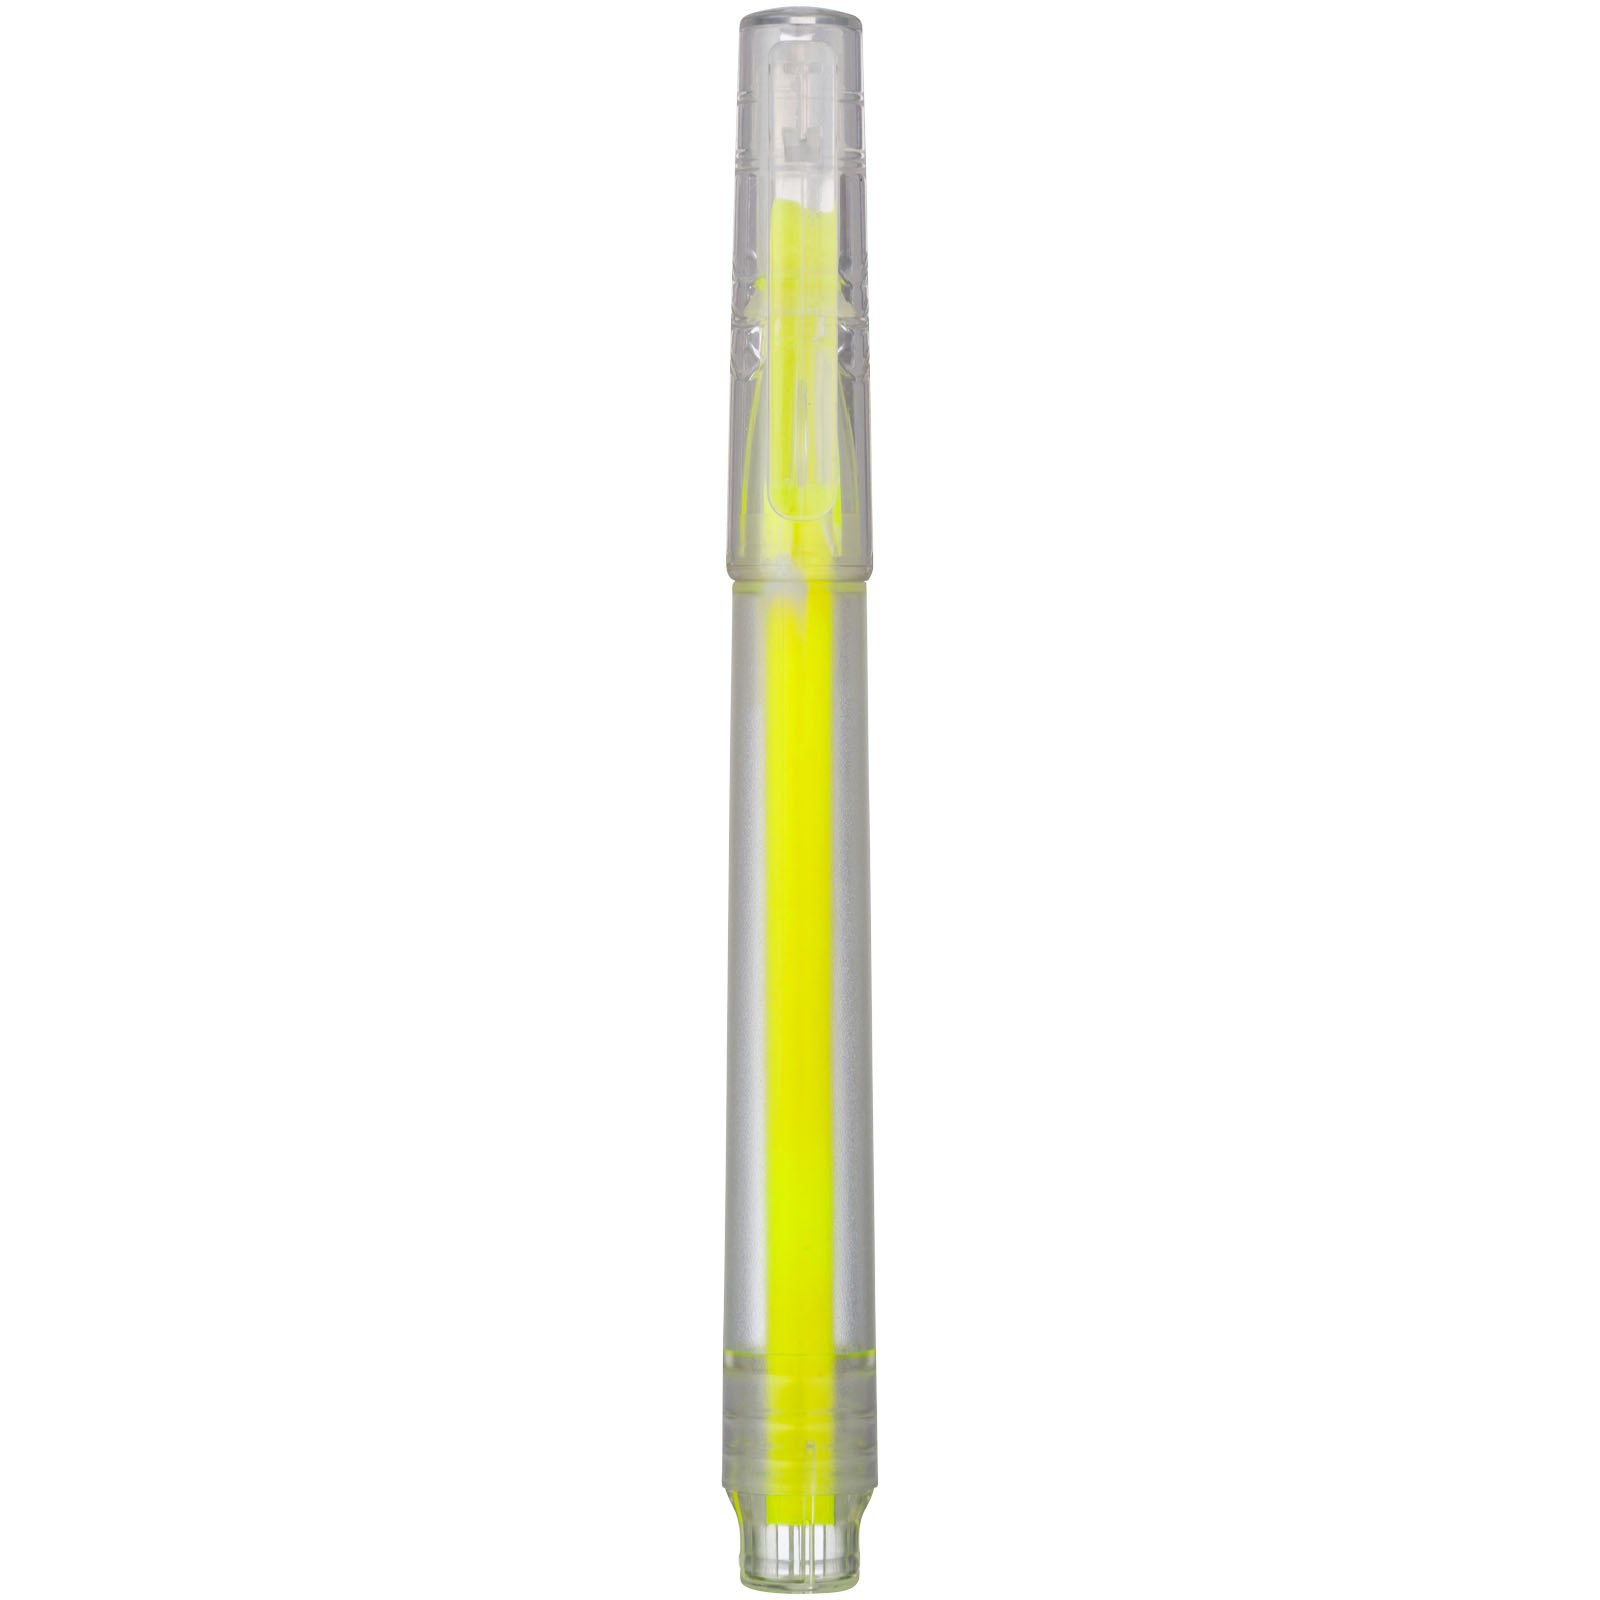 Vancouver recycled highlighter - Transparent Clear